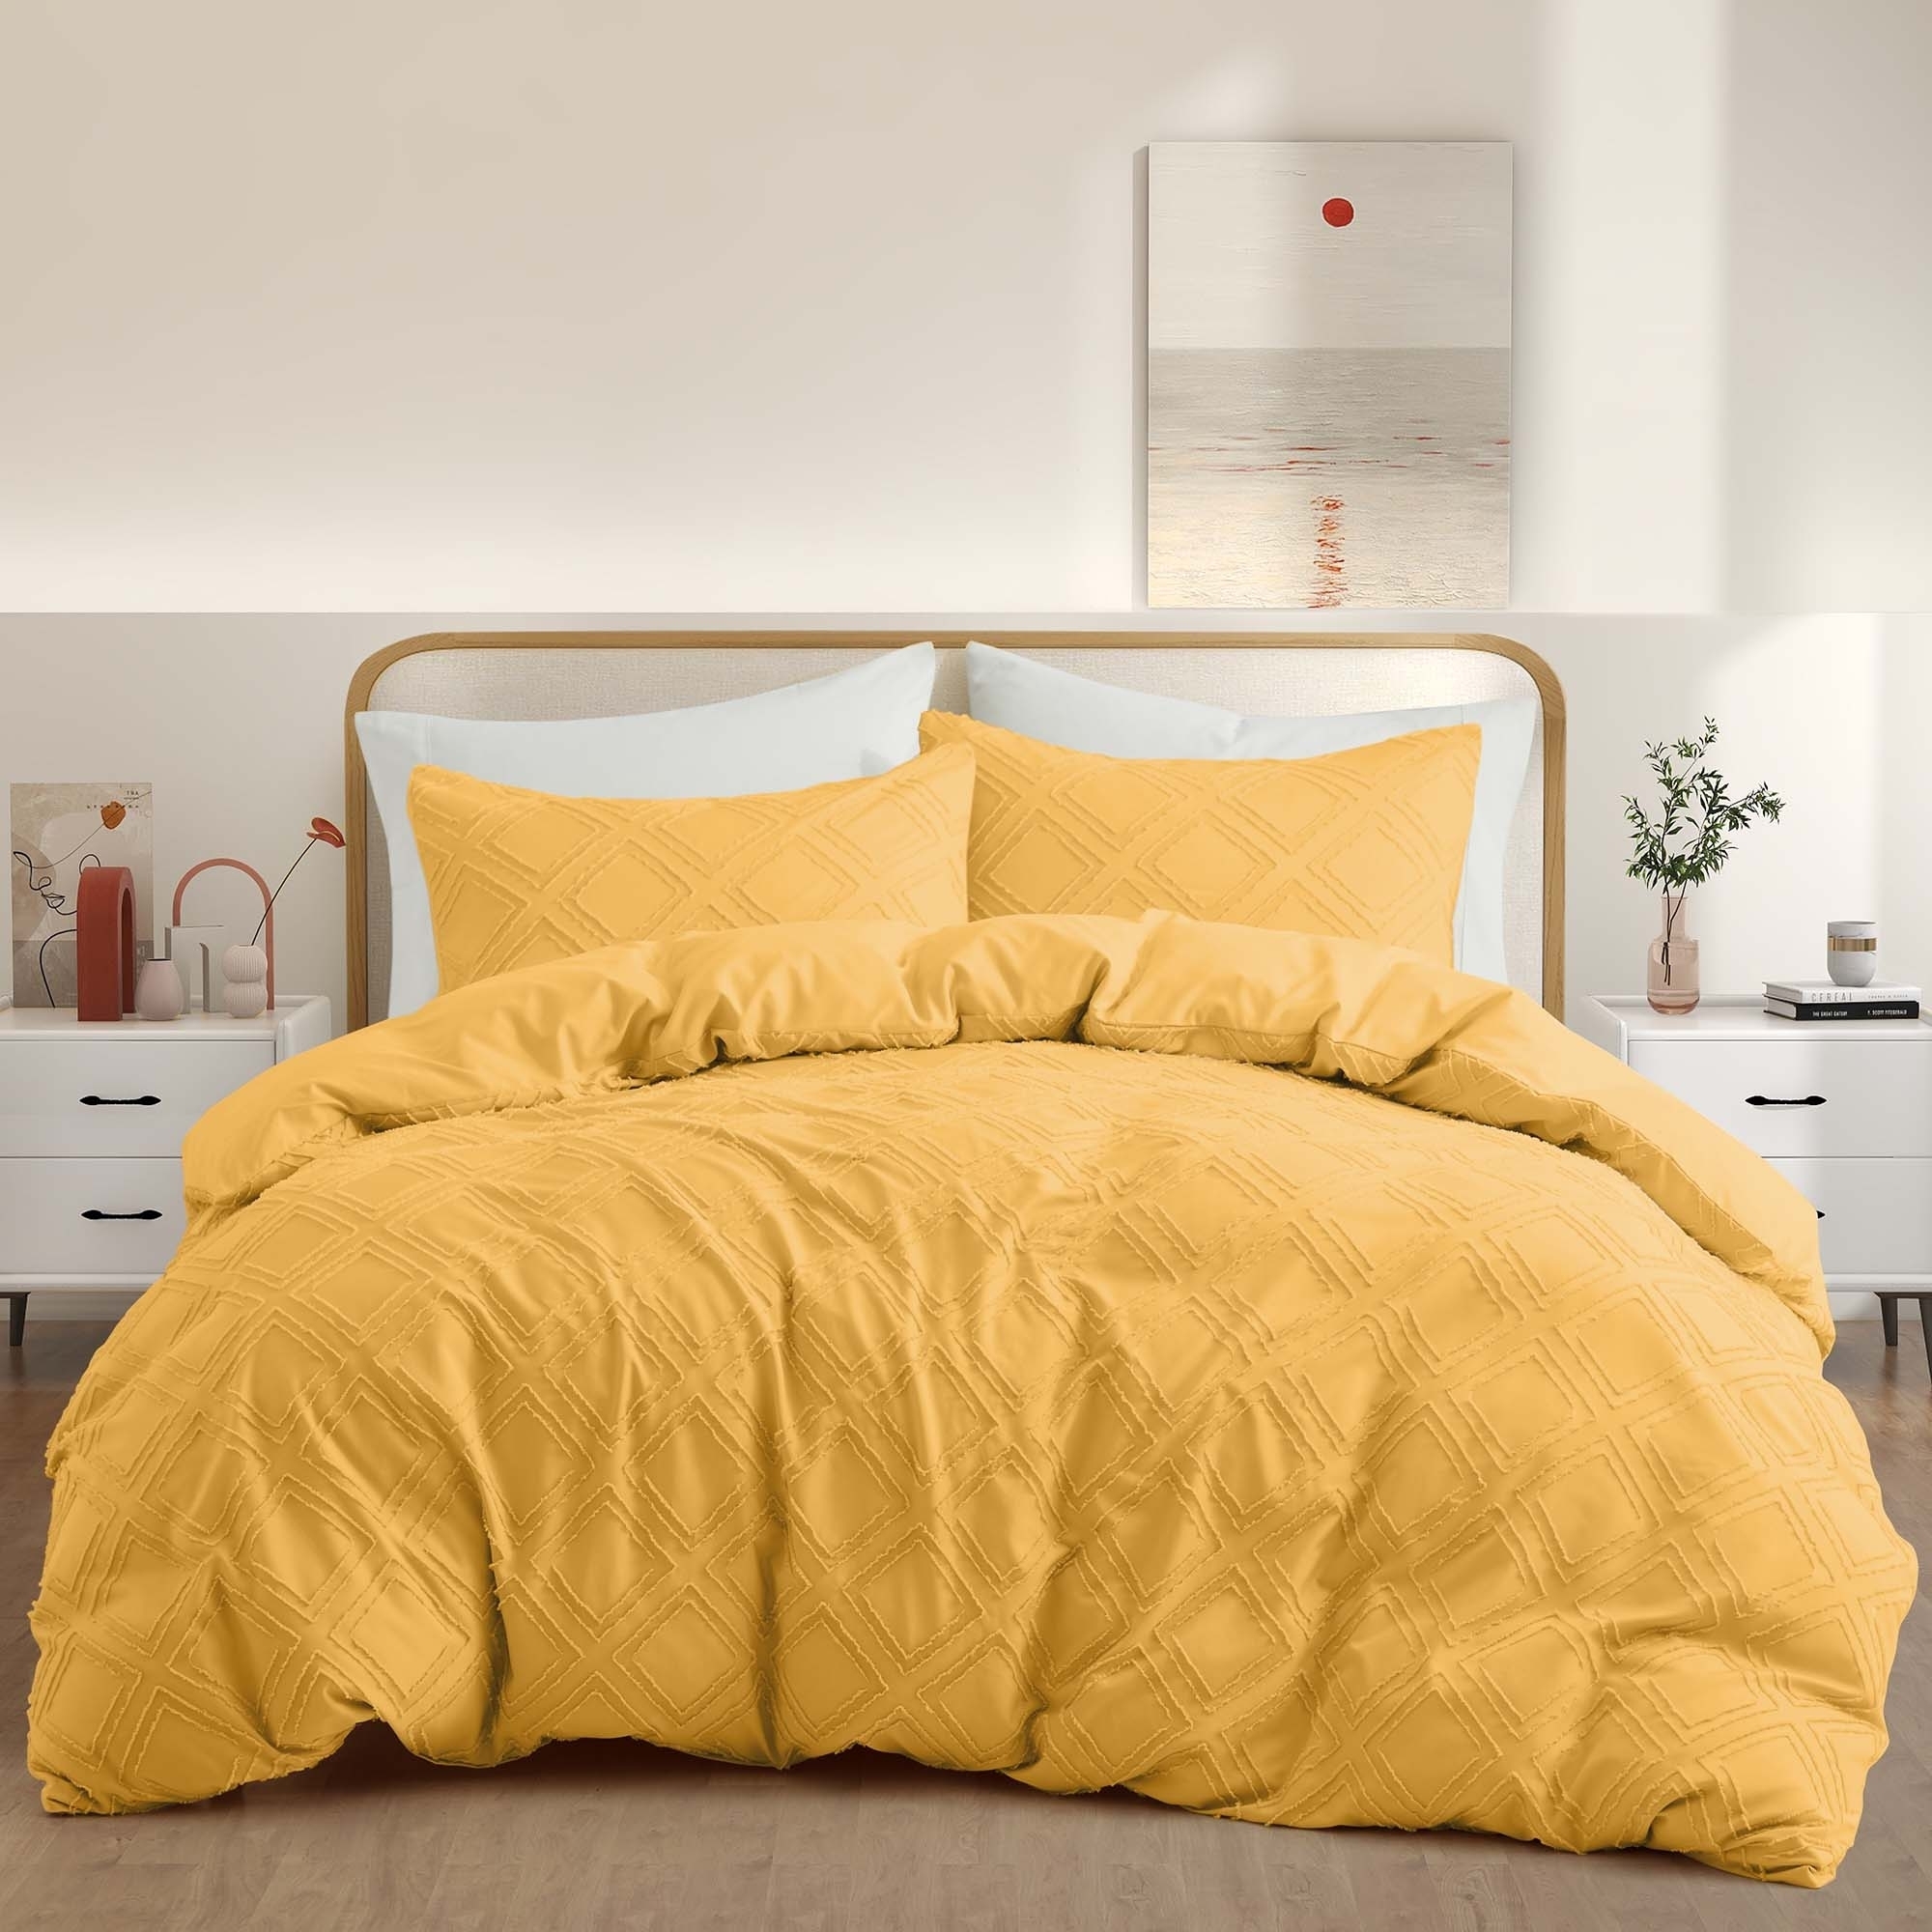 Basic Bedding Sets With All Season Goose Down Feather Comforter, 2 Pack Goose Down Pillows, Duvet Cover Set - Yellow Bundles Option, King Si